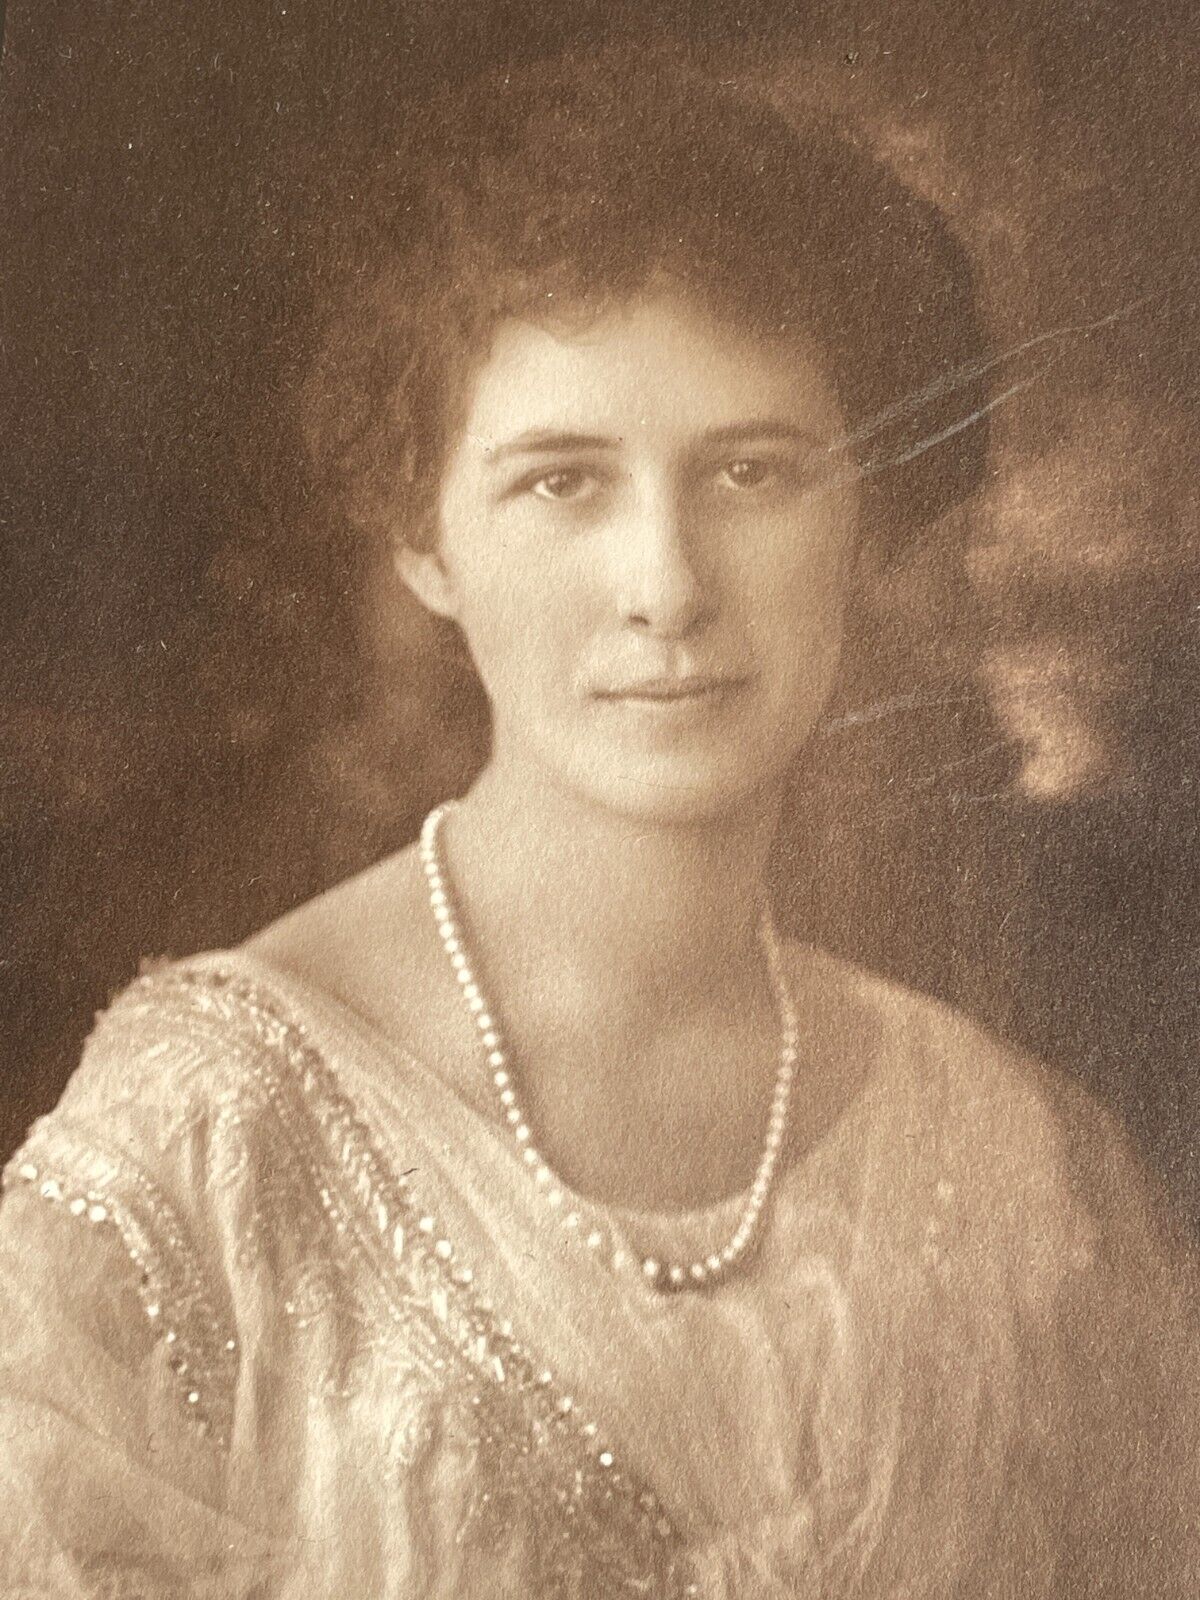 CG) Photograph Pretty Beautiful Wealthy Woman White Dress Pearl Necklace 1910-20